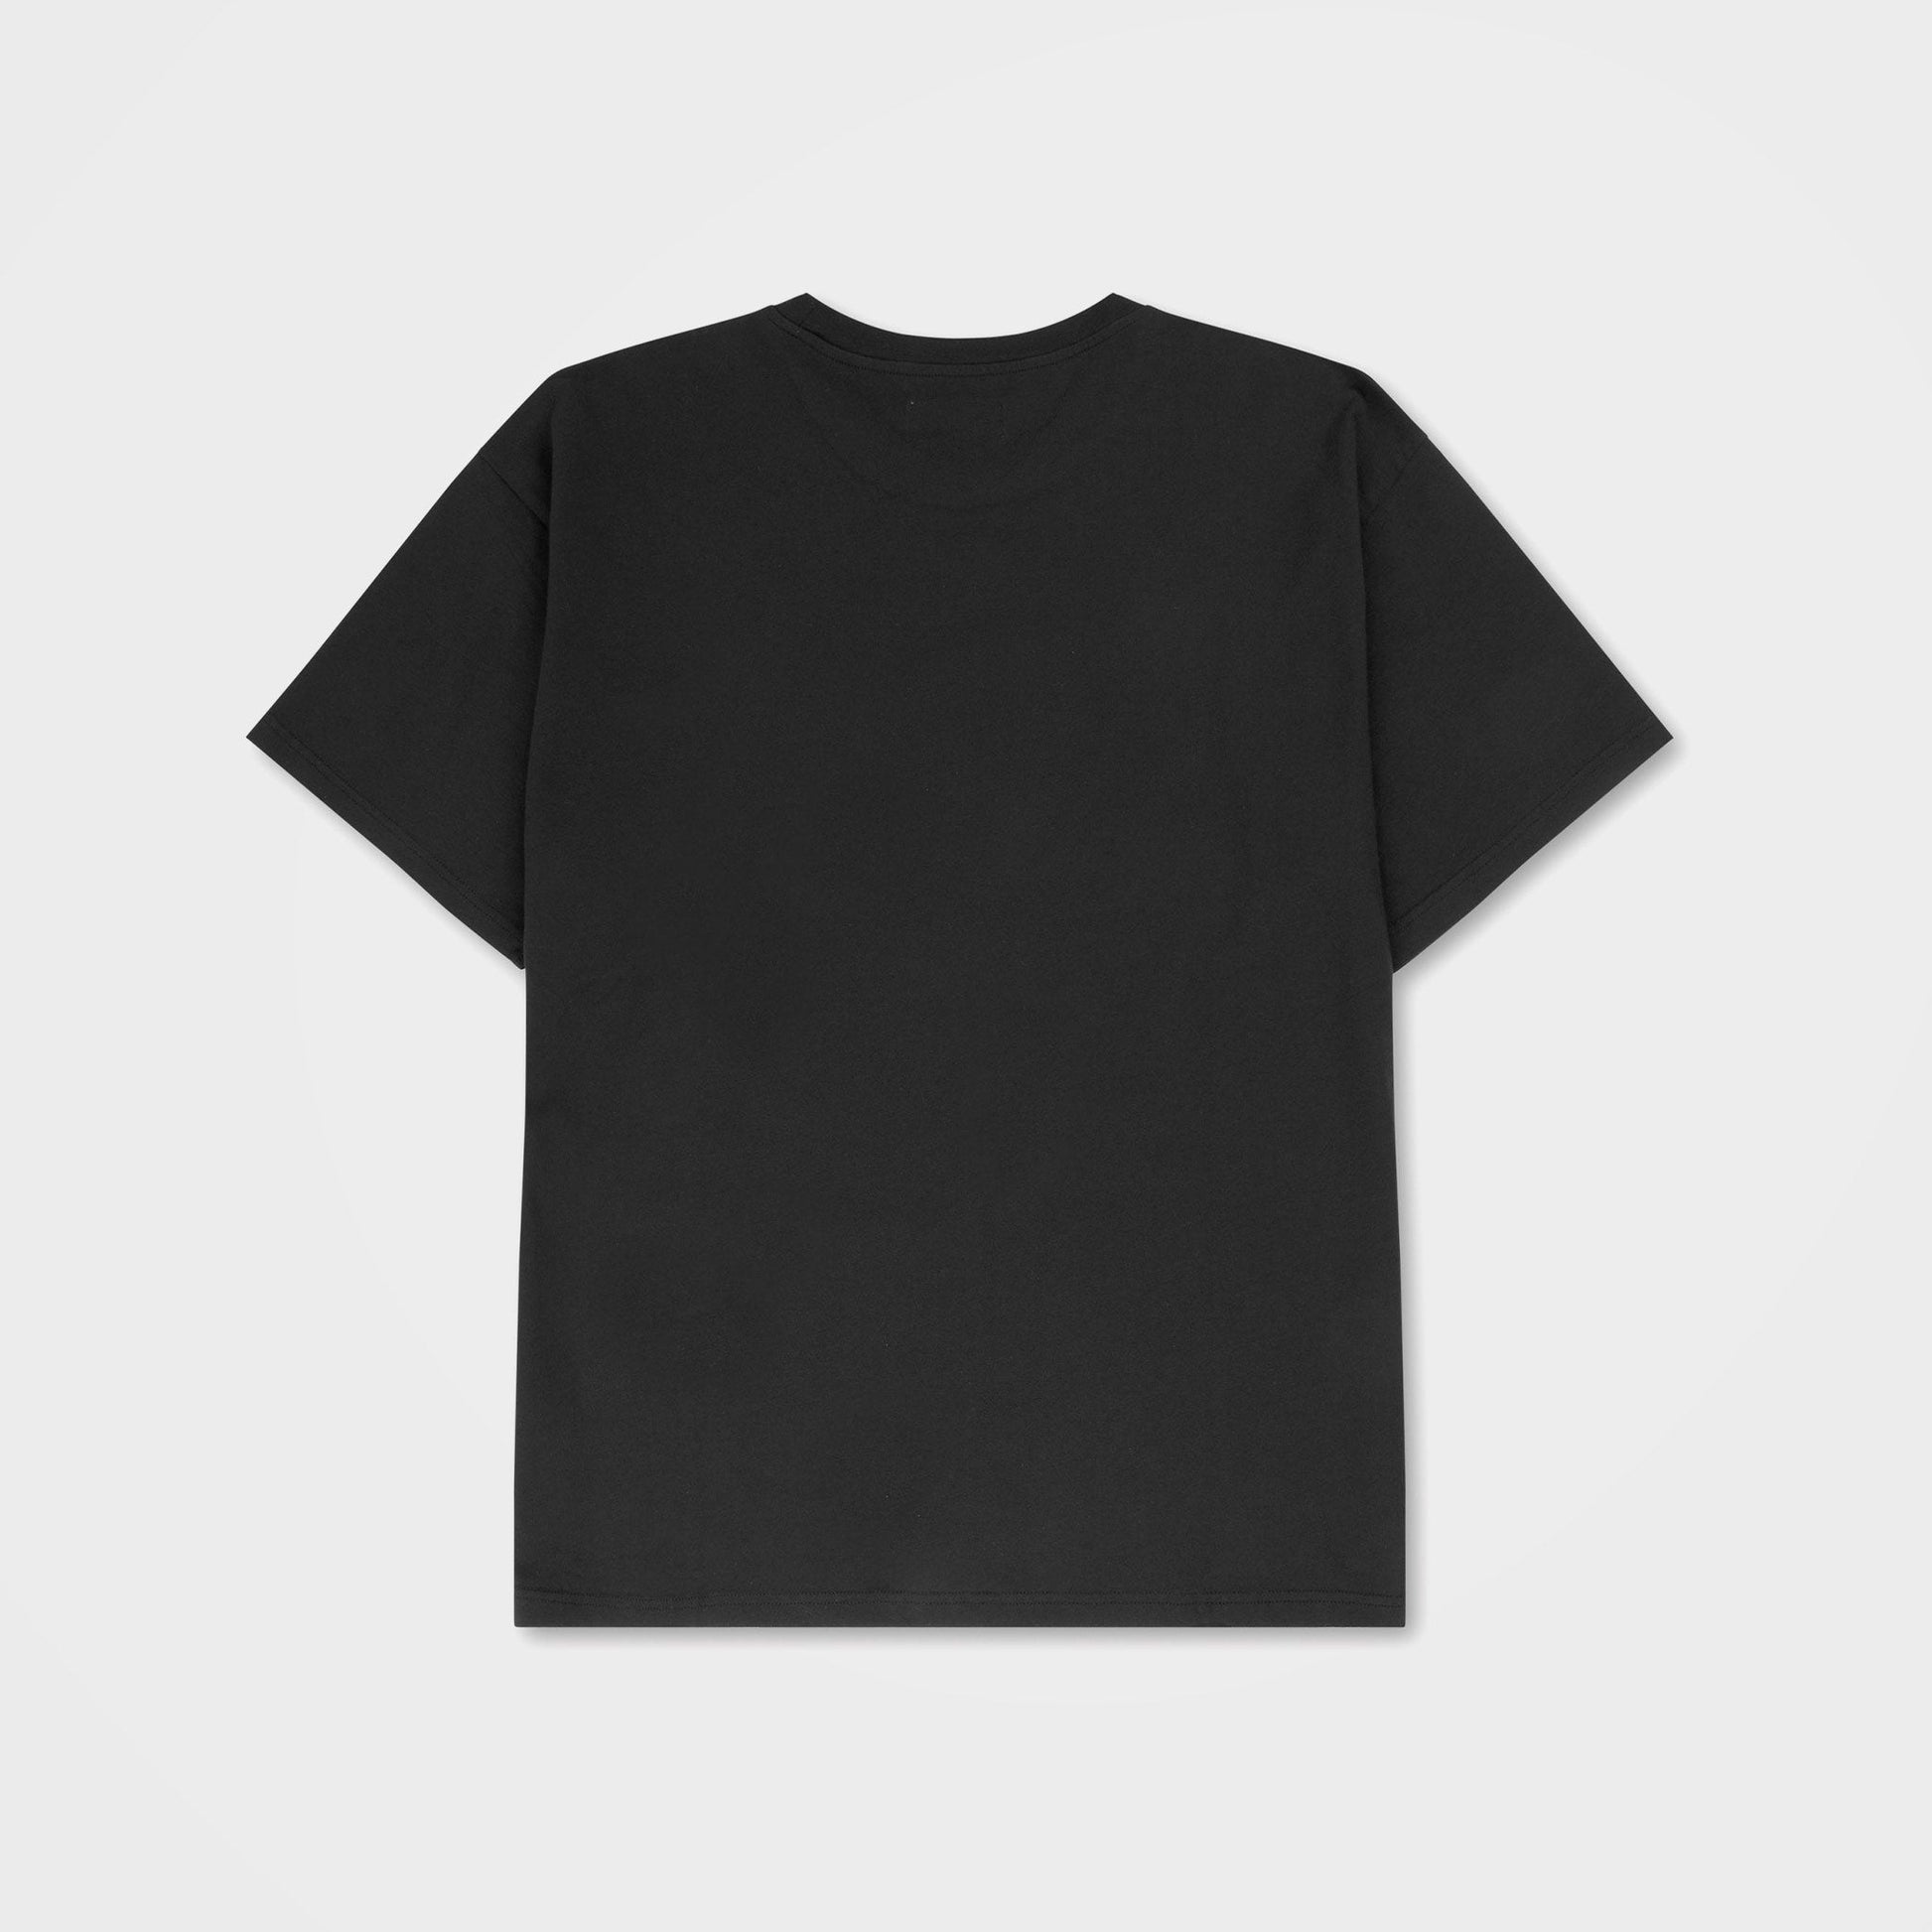 Black Organic Cotton T-Shirt by 7Days Active